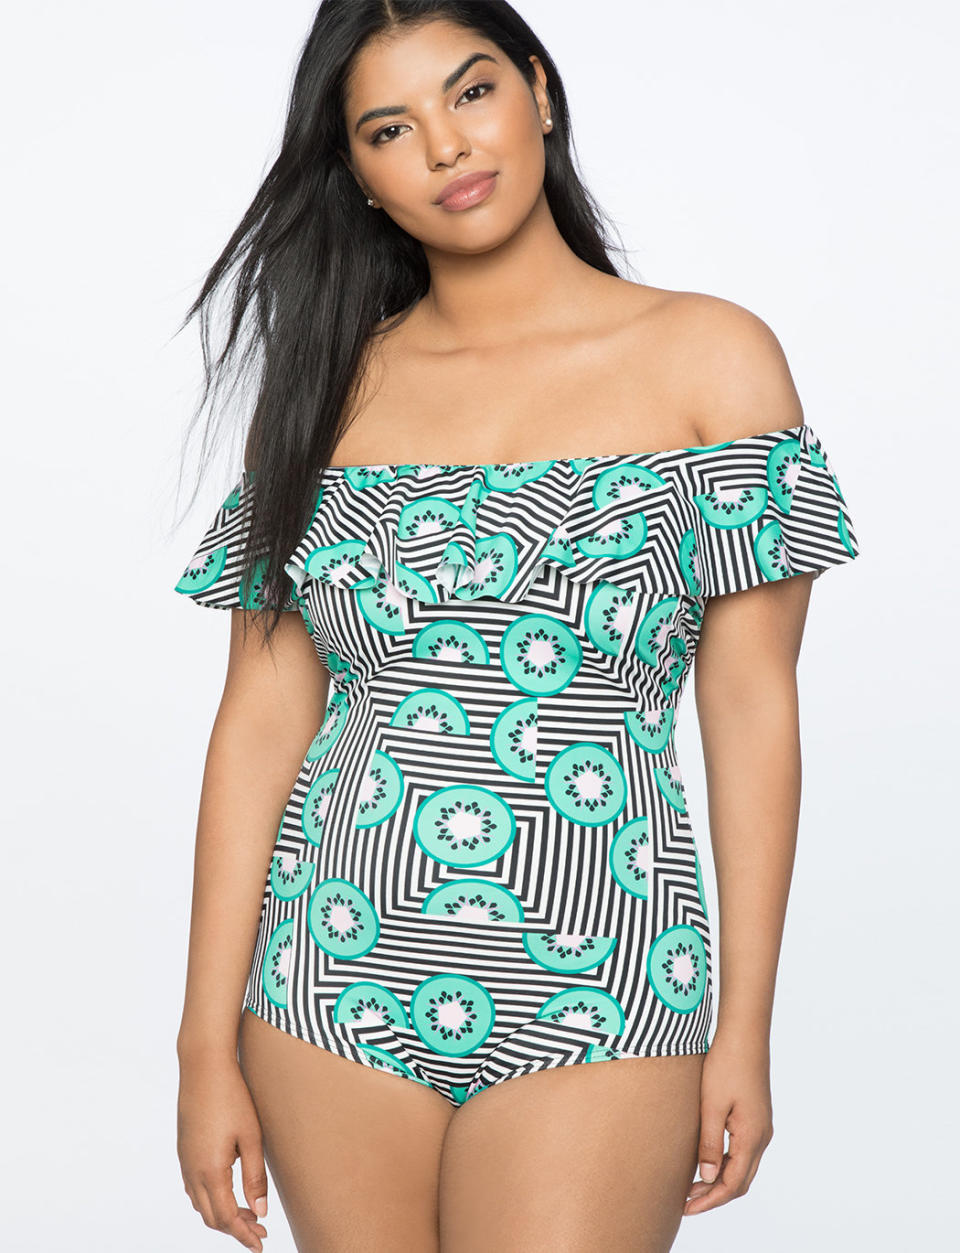 Get the suit <a href="http://www.eloquii.com/ruffle-off-the-shoulder-one-piece-swimsuit/1635758.html?dwvar_1635758_colorCode=55&amp;q=off%20the%20shoulder%20swimsuit&amp;start=16" target="_blank">here</a>.